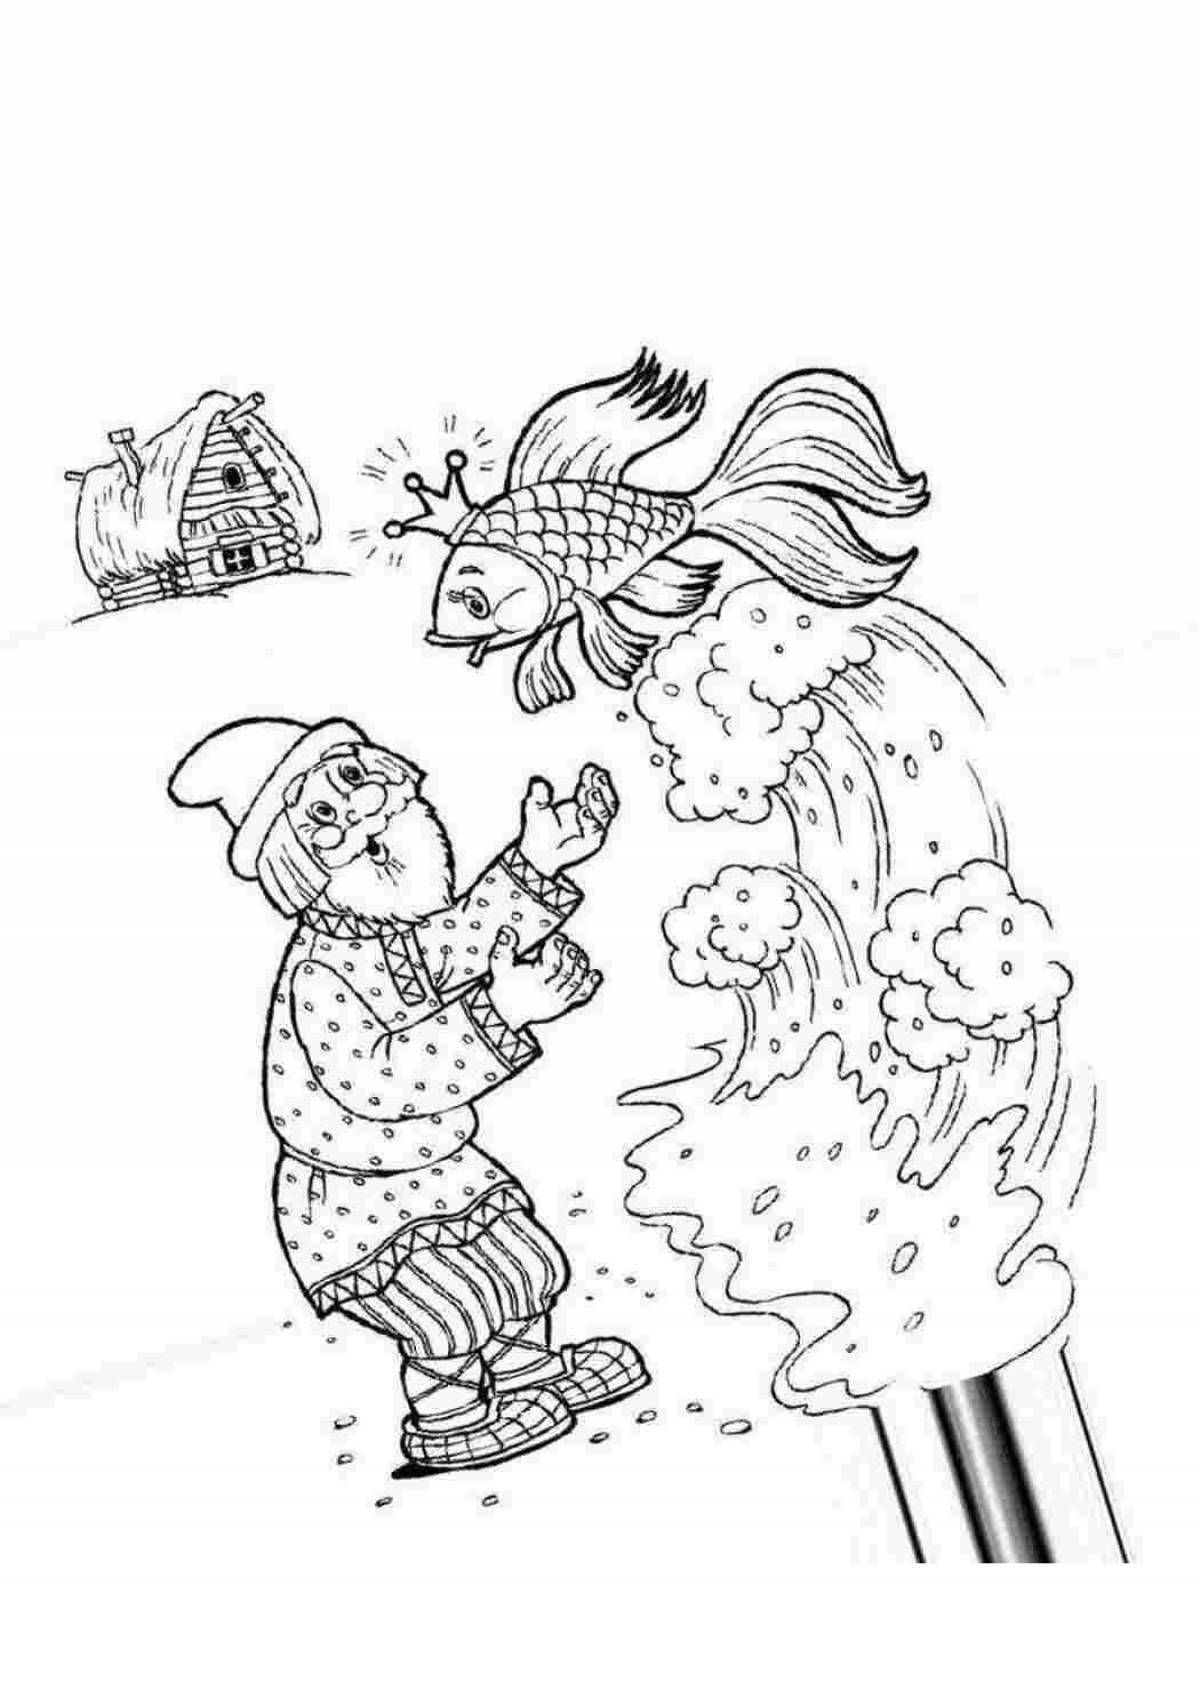 Tempting illustration of a fisherman and a fish